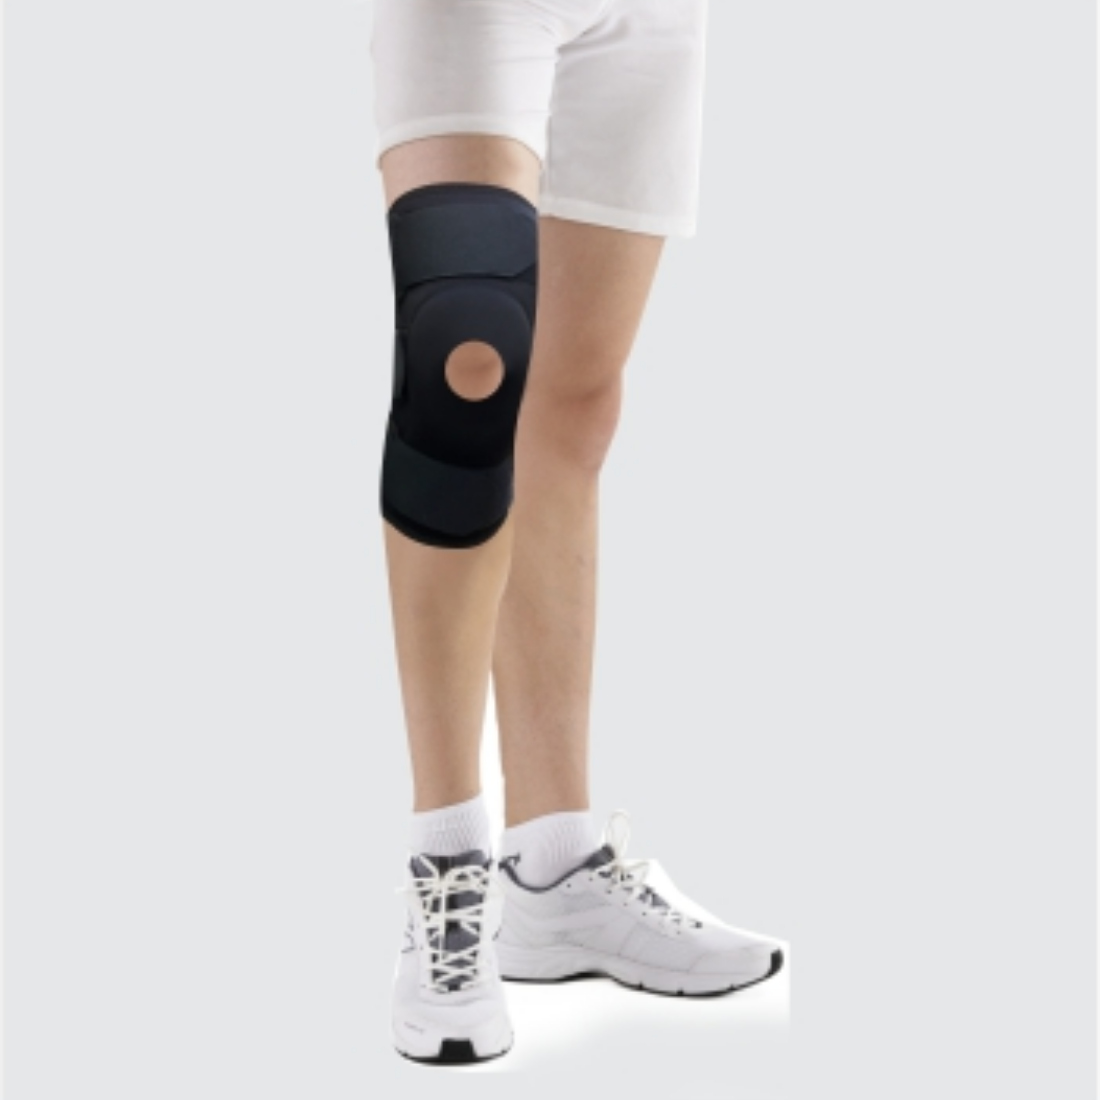 Buy Dyna Wrap Around Knee Support Online at Best Price in Chennai